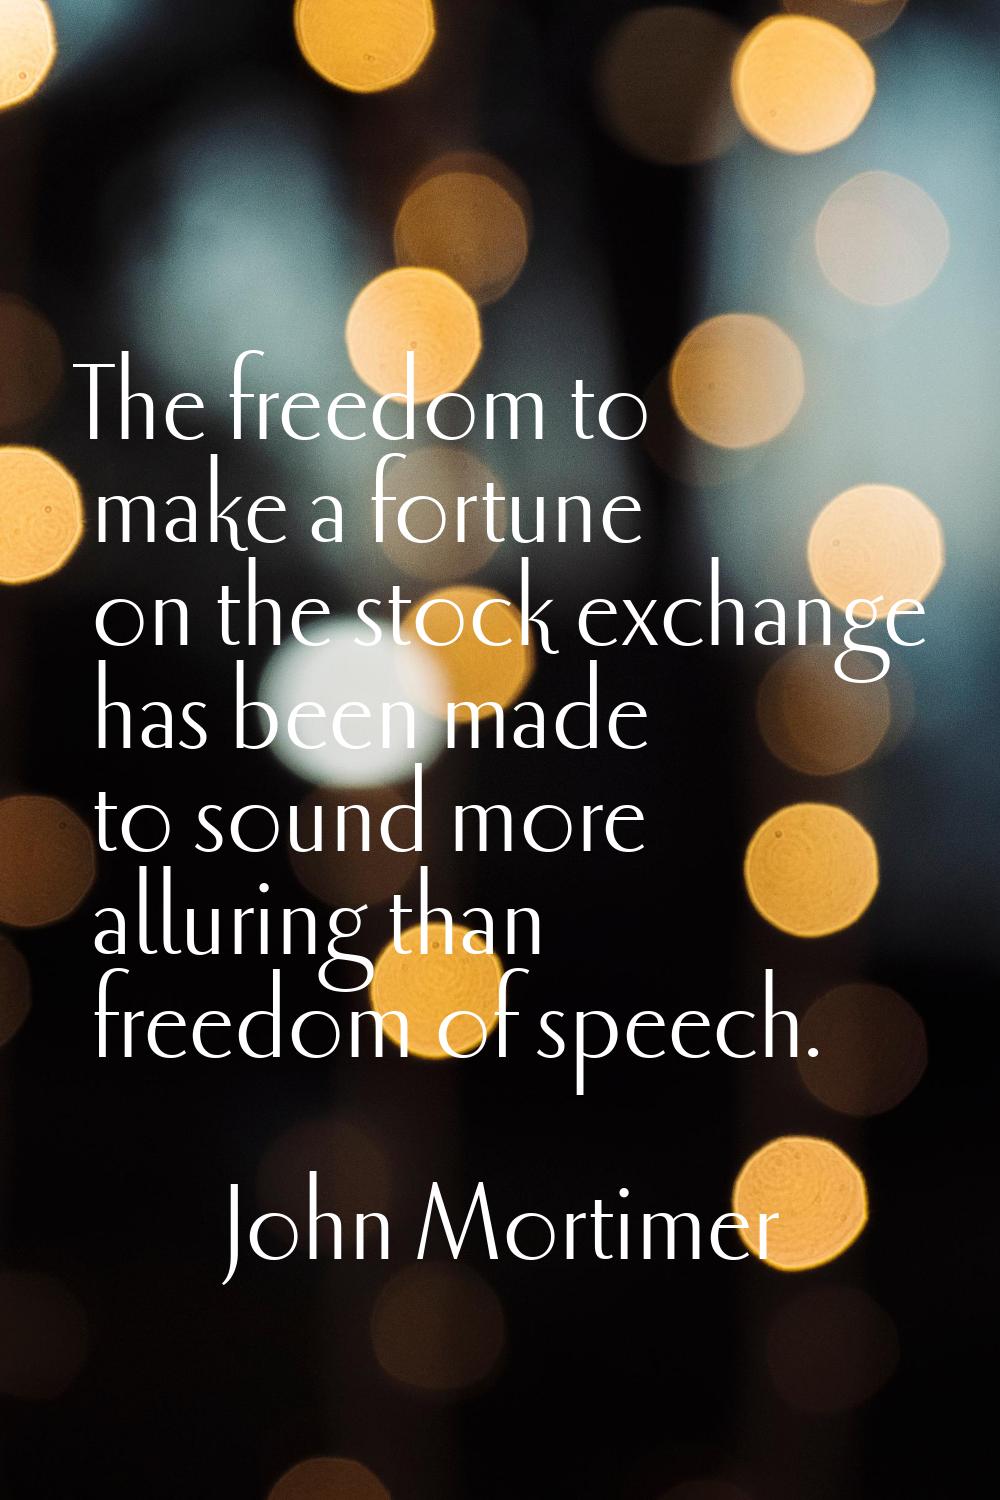 The freedom to make a fortune on the stock exchange has been made to sound more alluring than freed